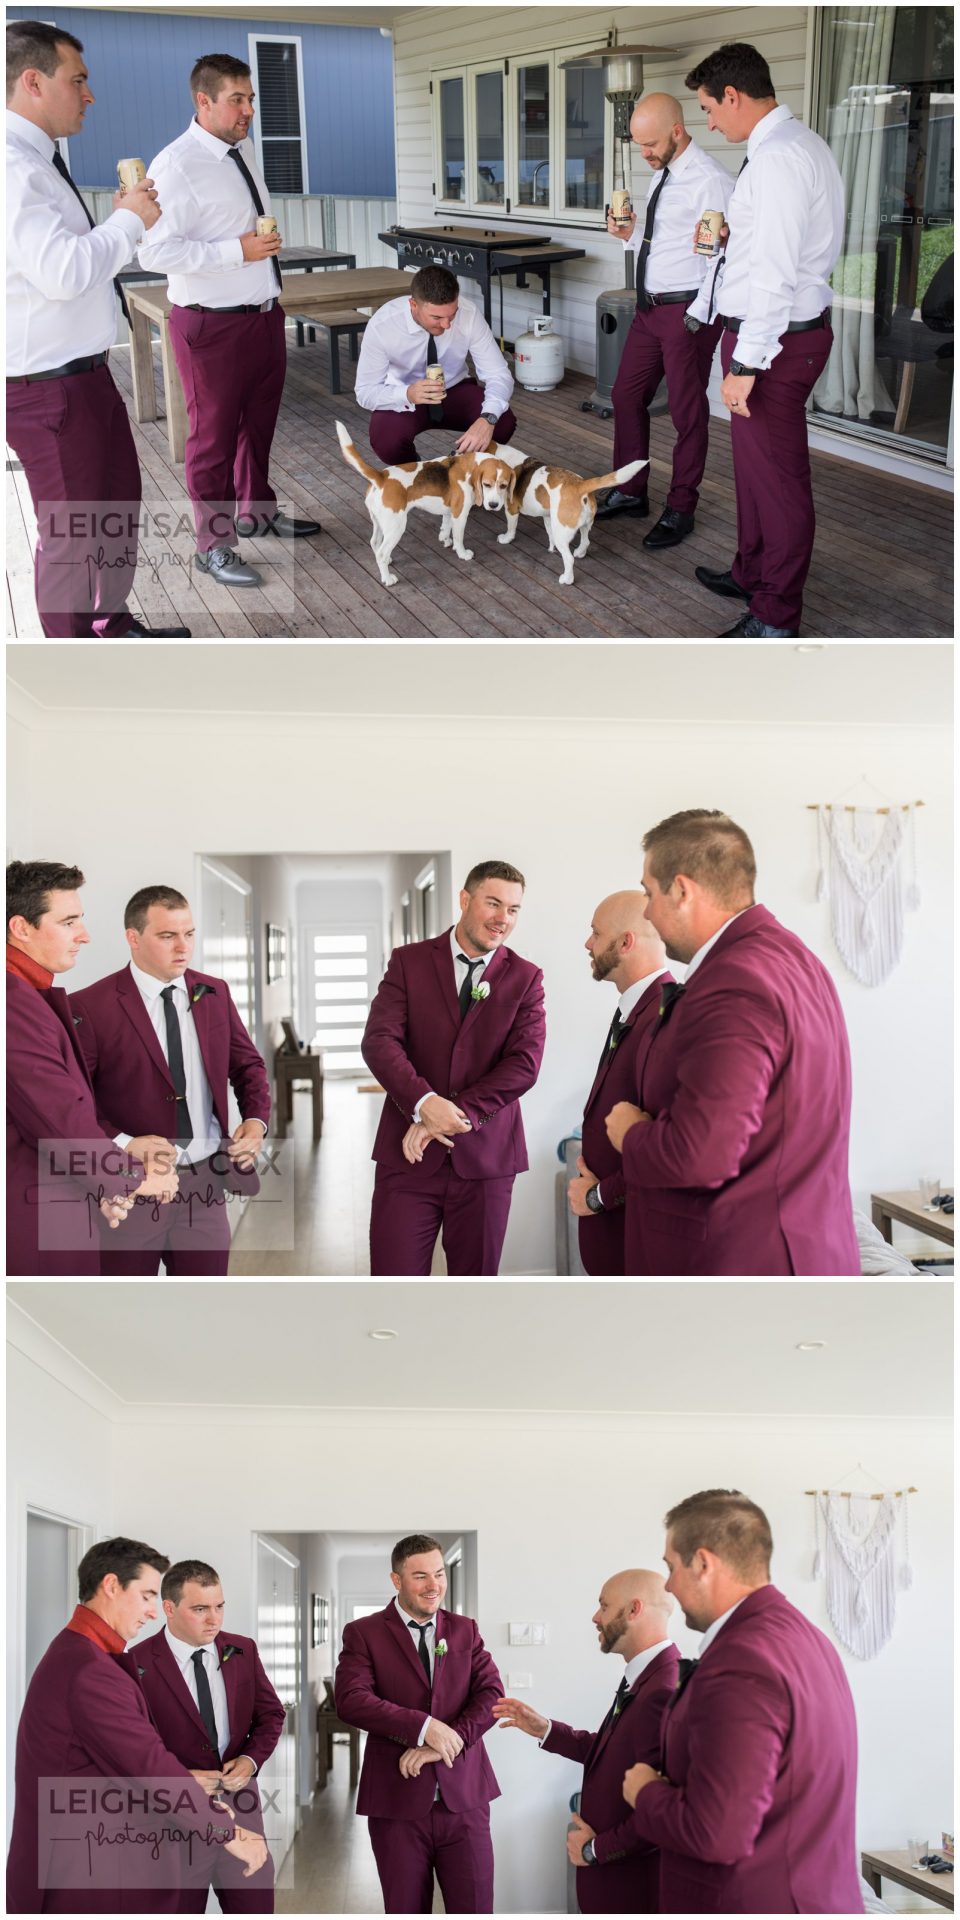 maroon suits